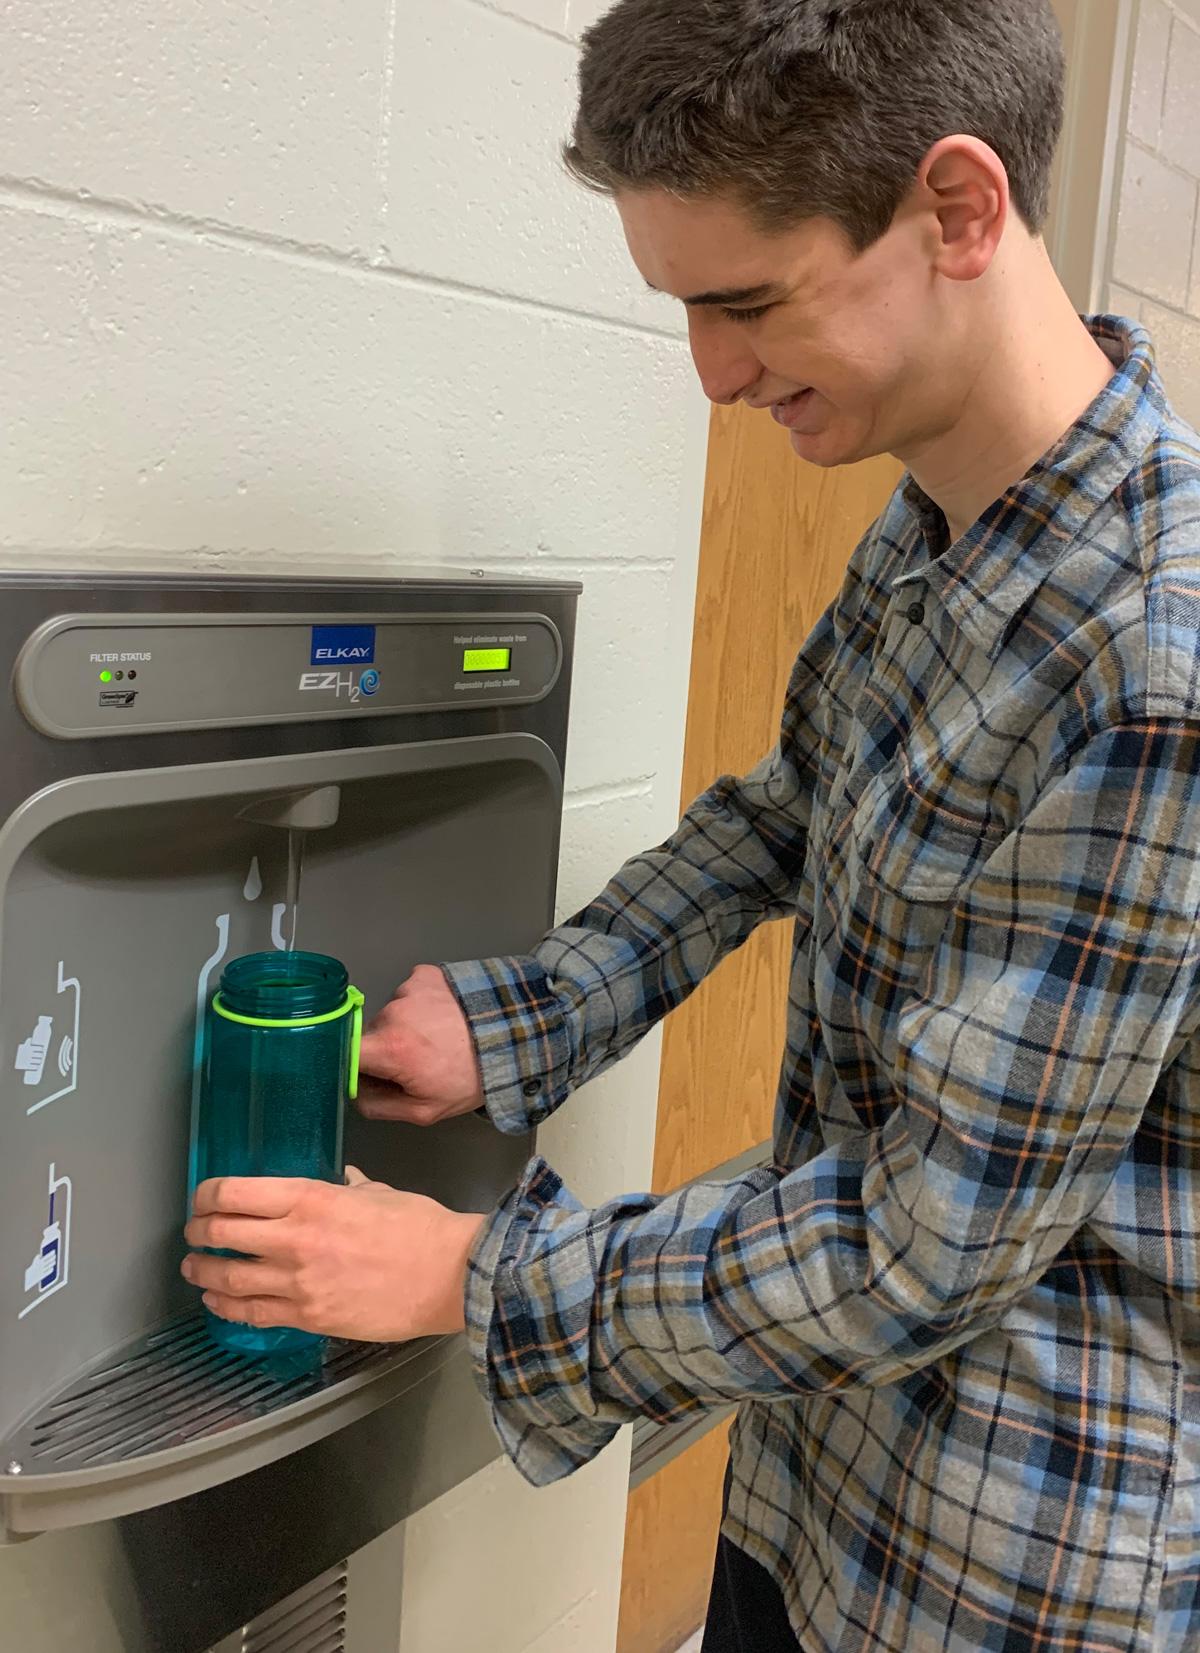 Adult resident using a water refill station